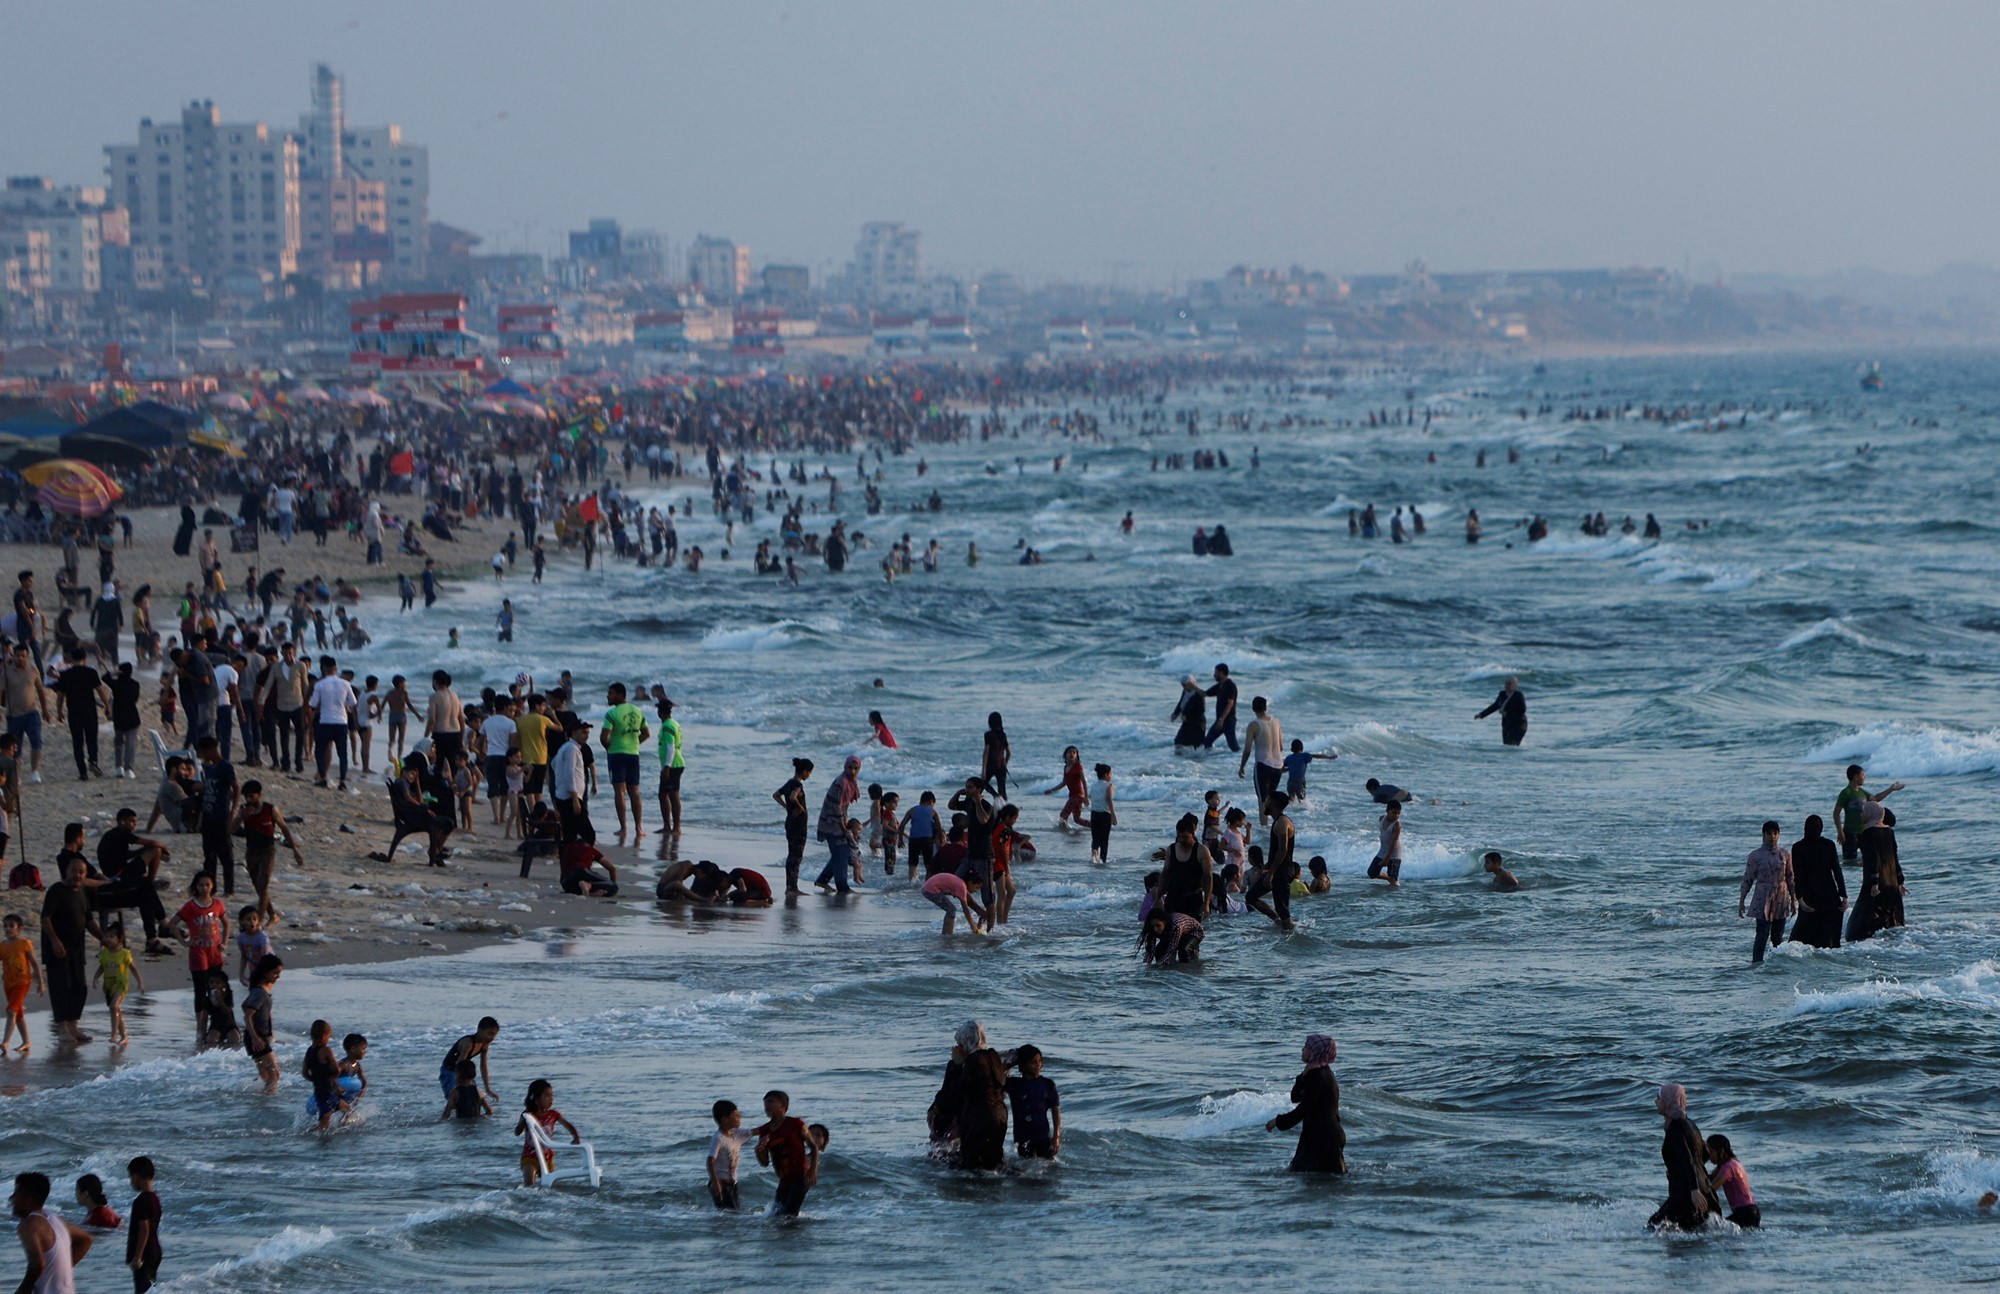 Large groups of people gather at the beach